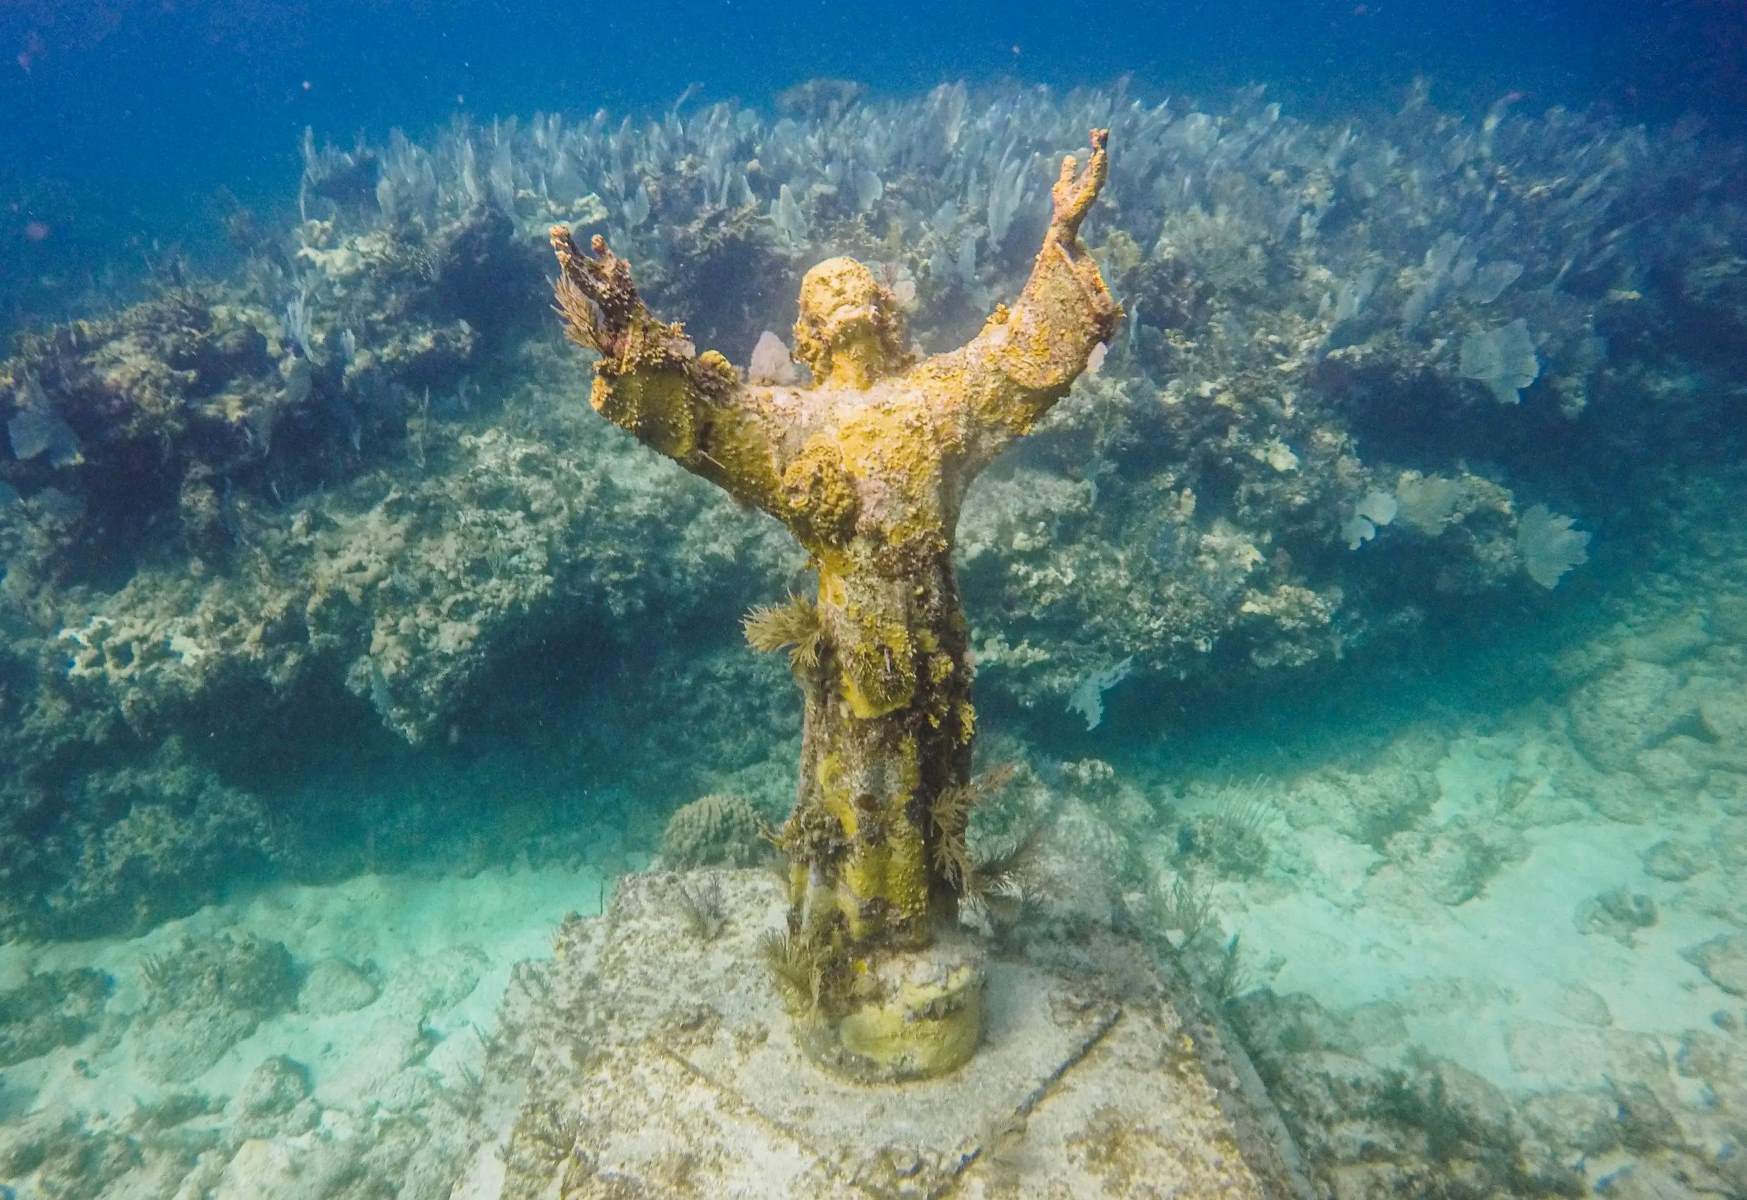 13 Astonishing Facts About The Christ Of The Abyss - Facts.net